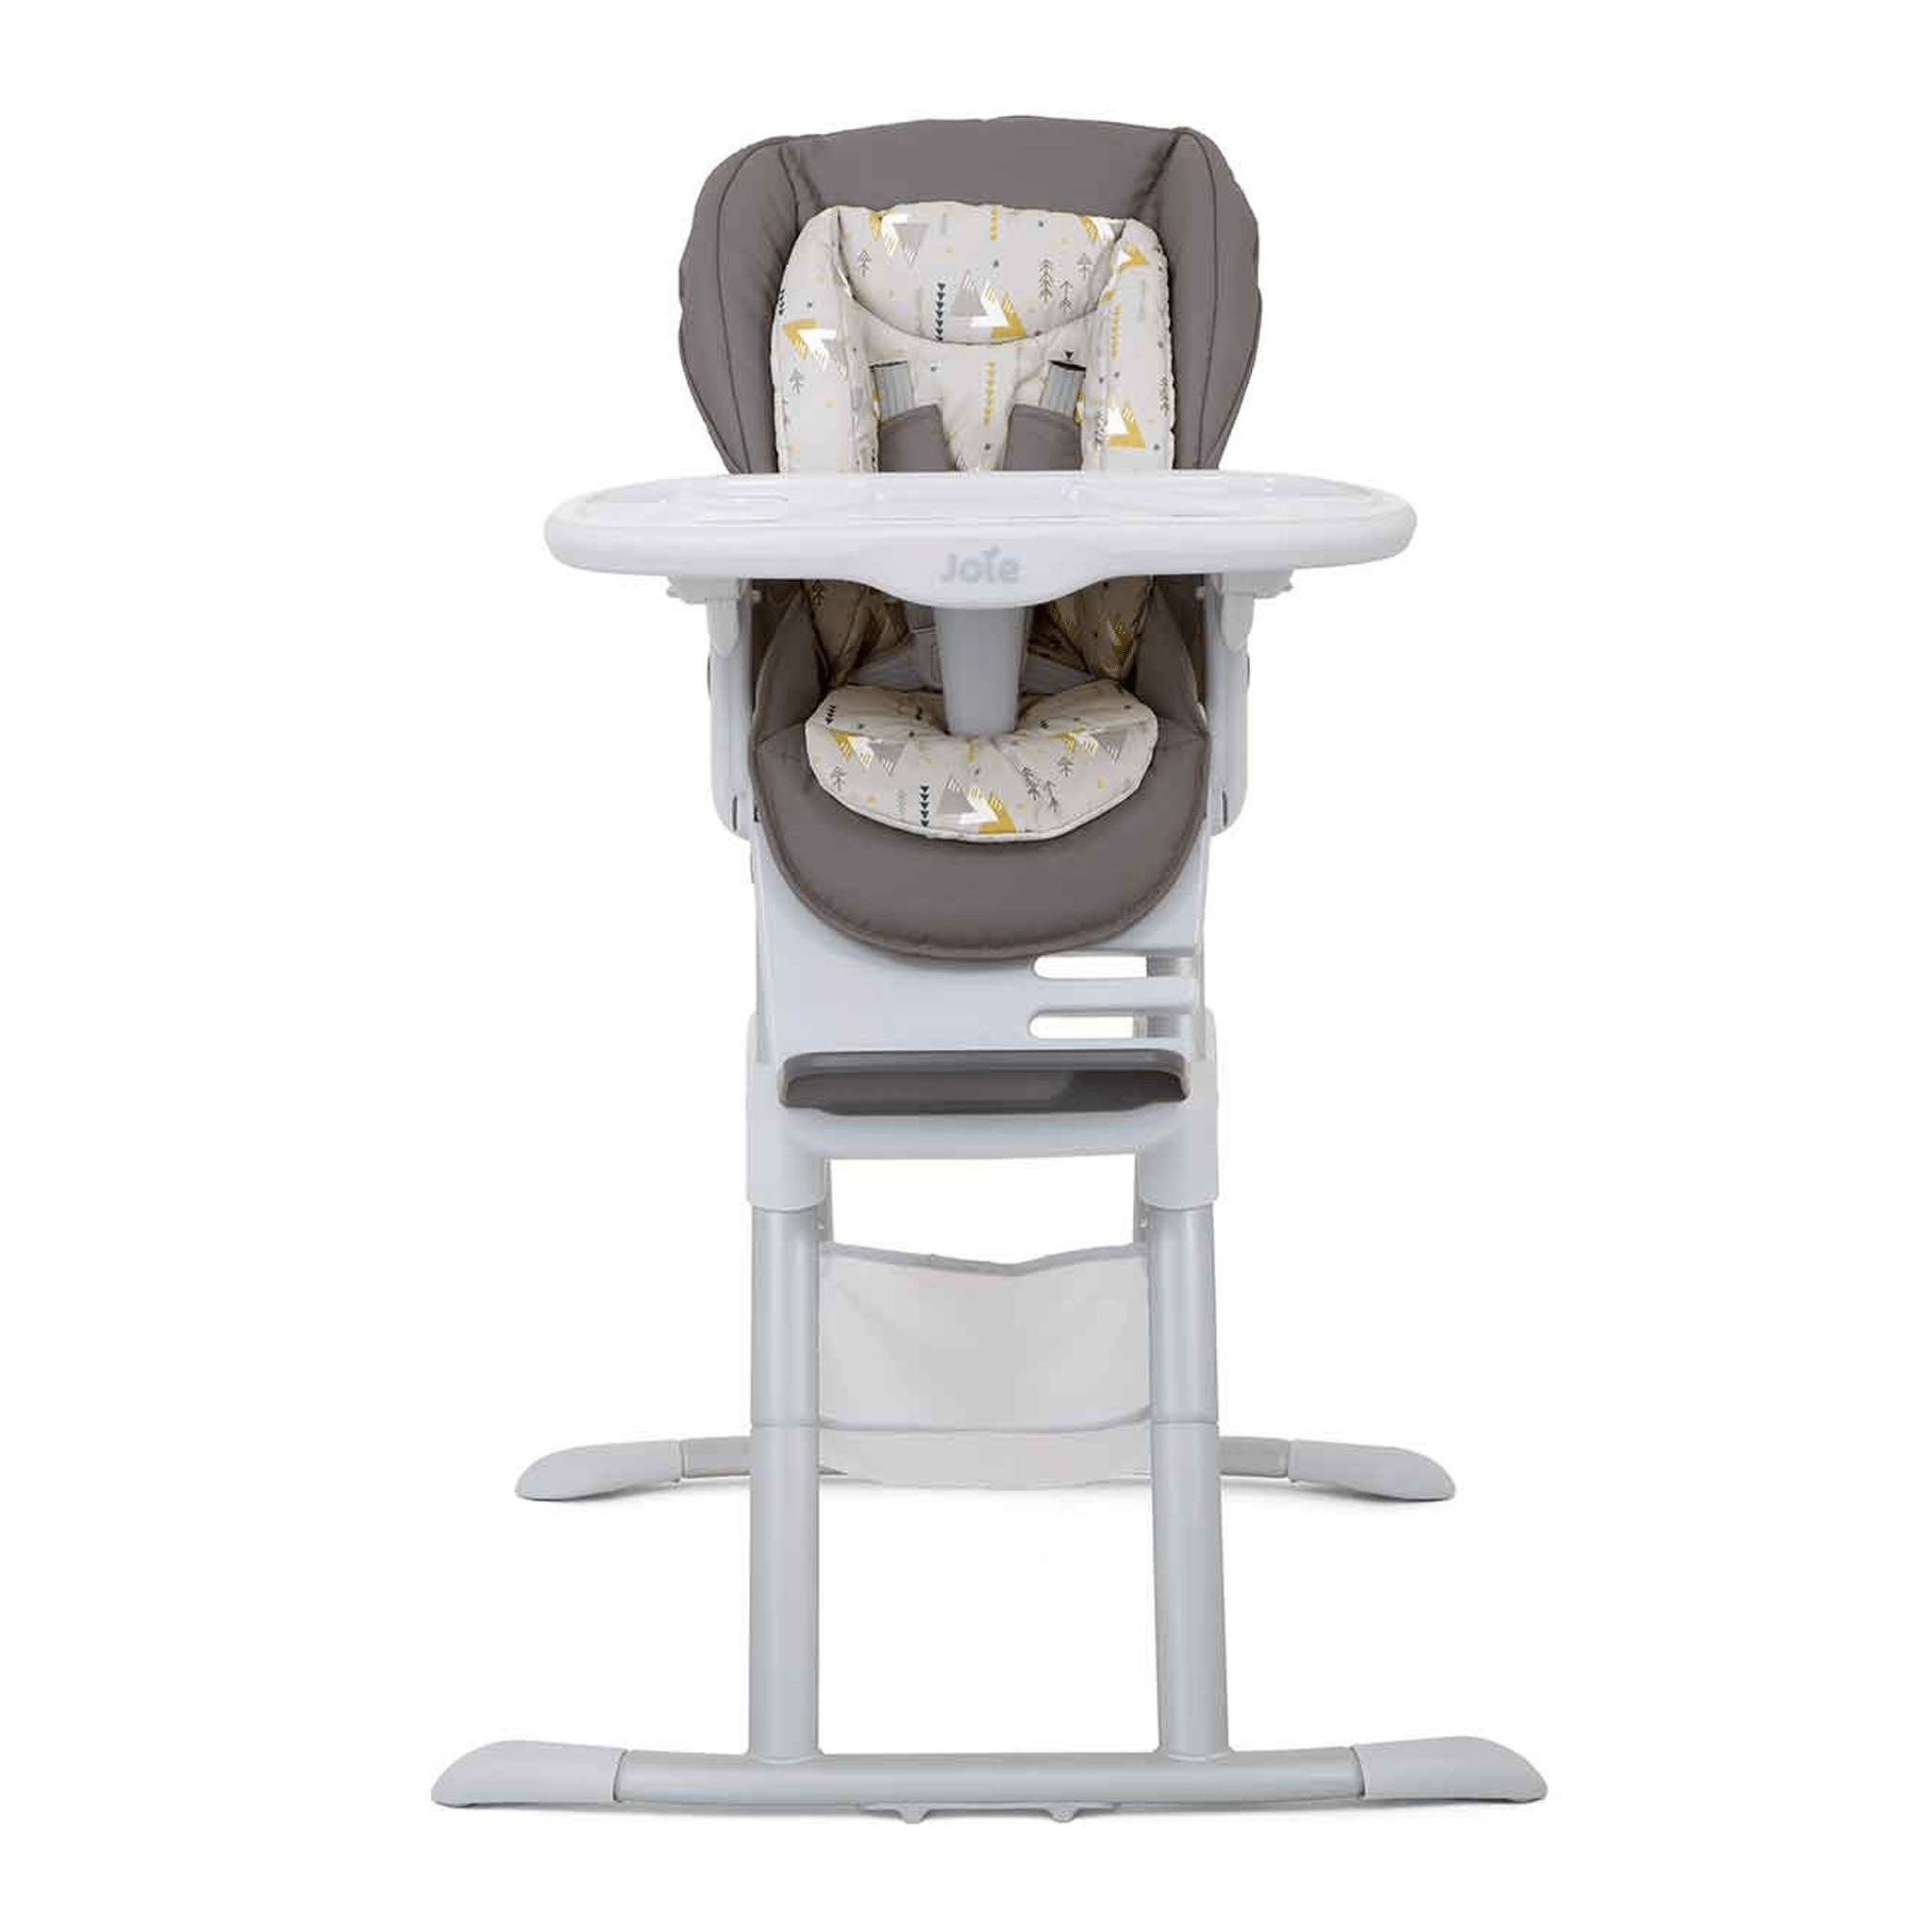 Joie Mimzy Spin 3in1 Highchair in Geometric Mountains Baby Highchairs H1124BAGEM000 5056080614830